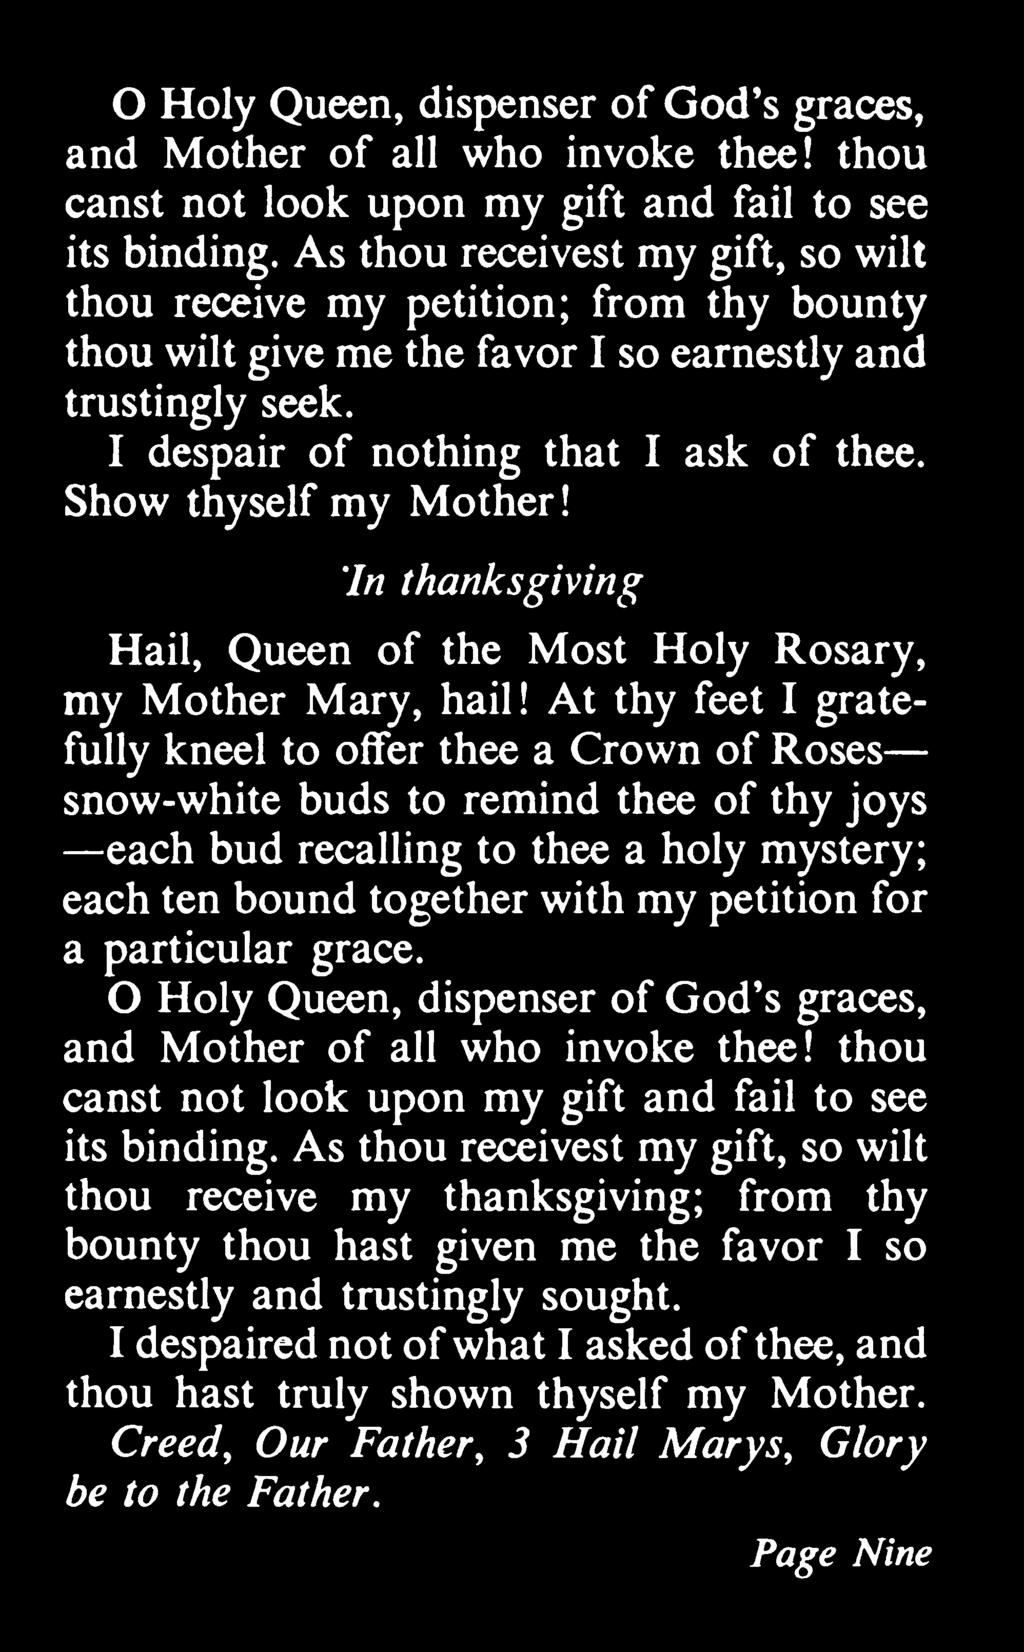 Show thyself my Mother! In thanksgiving Hail, Queen of the Most Holy Rosary, my Mother Mary, hail!